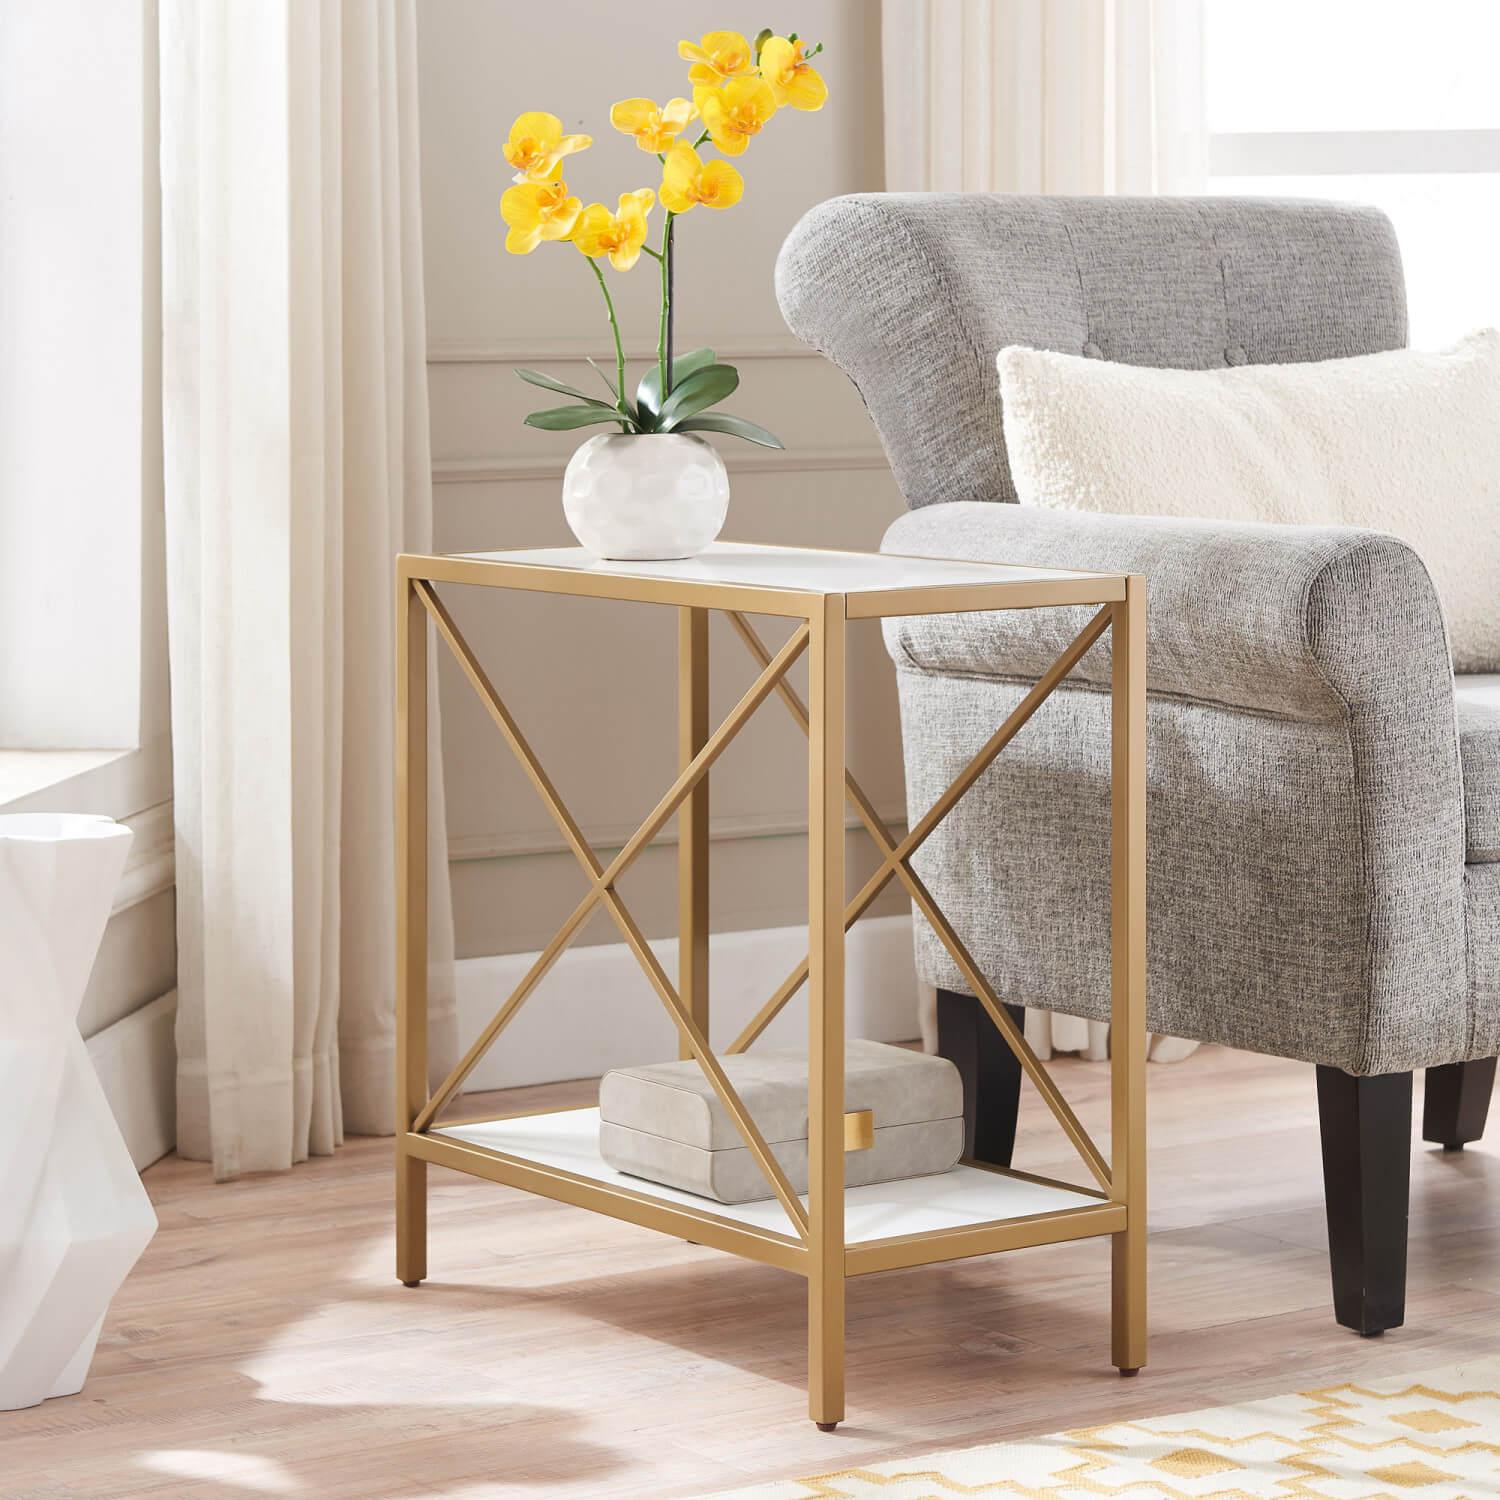 Leick Home Claudette Narrow End Table